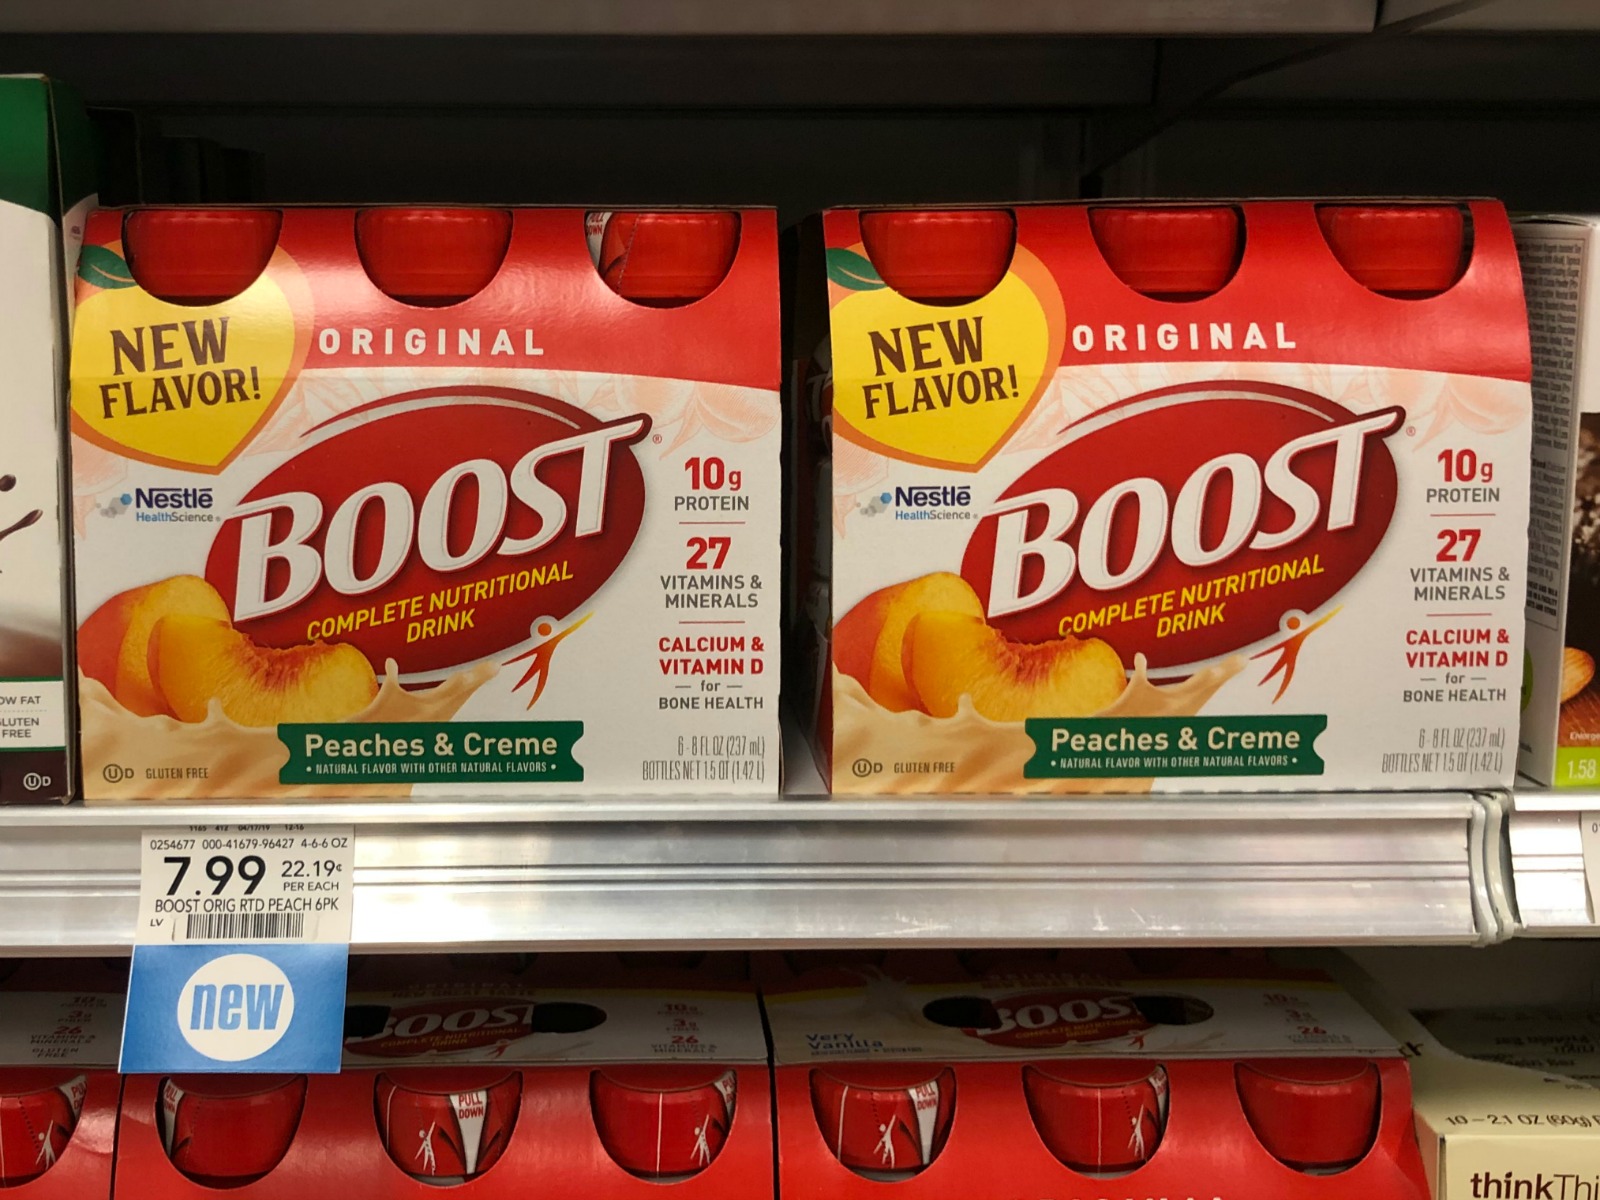 Save On BOOST® Nutritional Drinks At Your Local Publix - Enjoy Great Taste For Your Busy Day on I Heart Publix